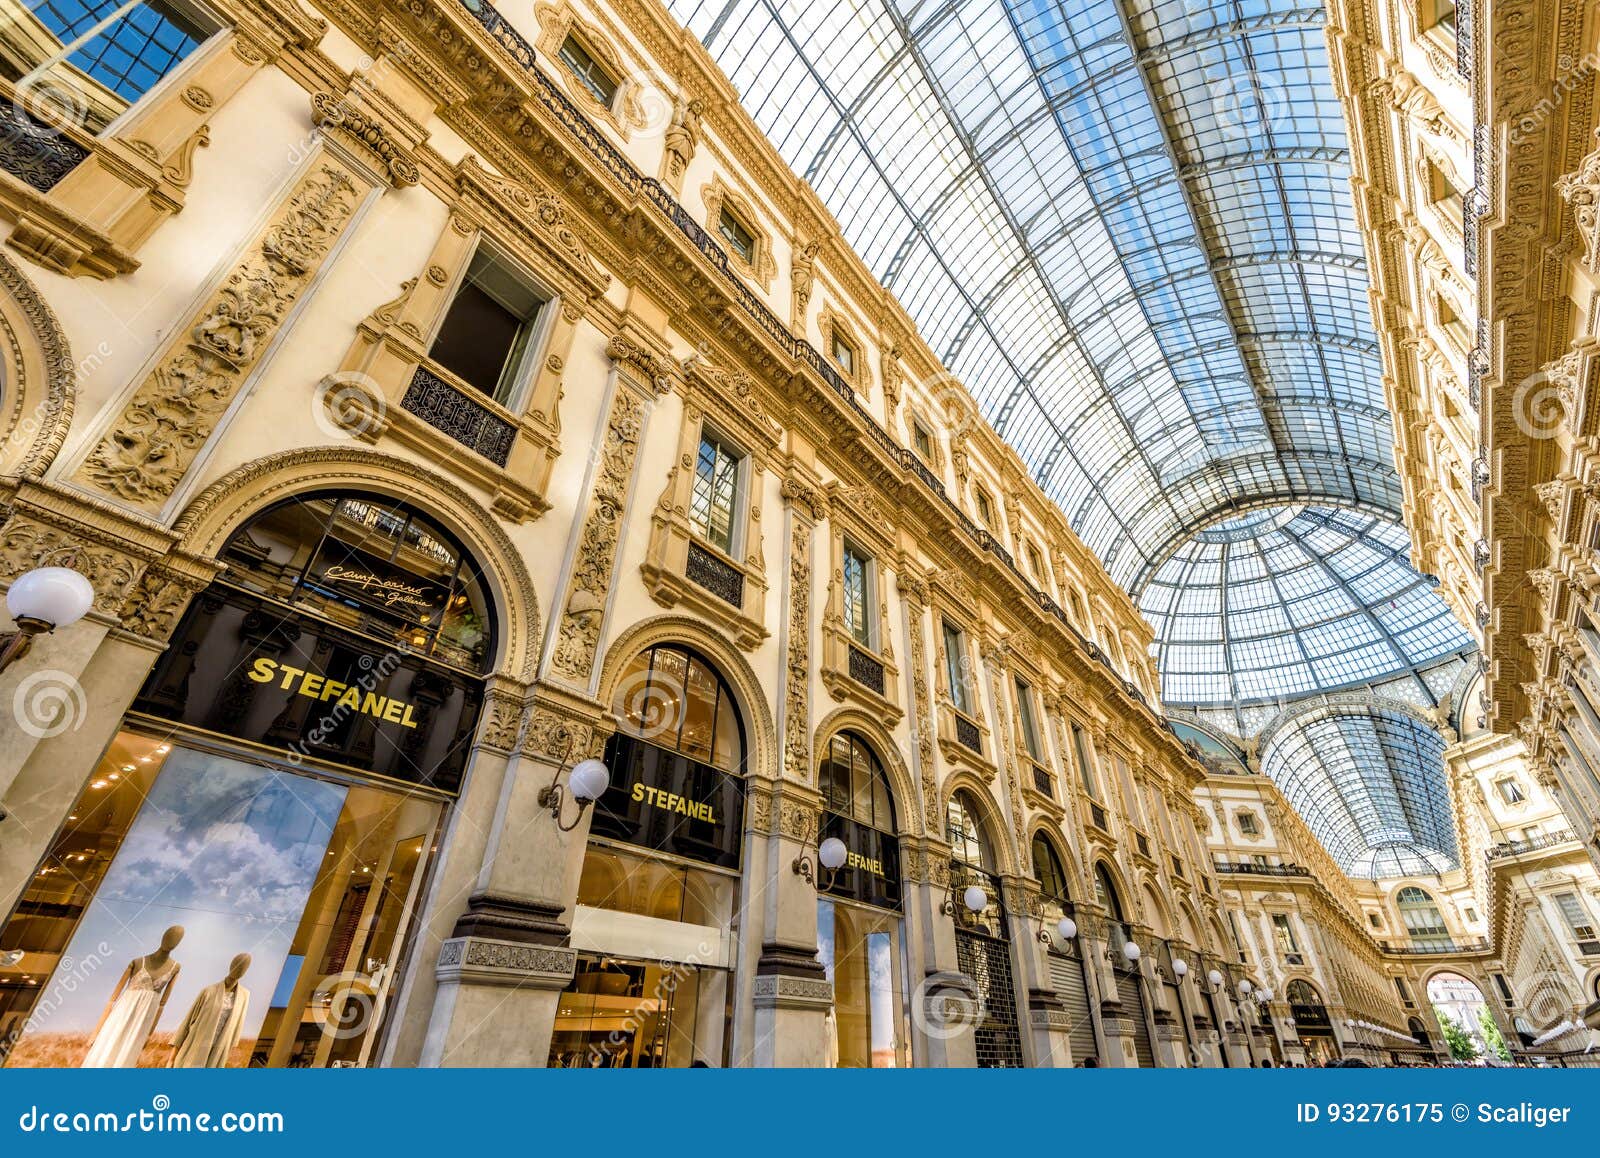 Milan, Italy, 20 December 2018: Facade Of Louis Vuitton Store Inside  Galleria Vittorio Emanuele II The World's Oldest Shopping Mall, Milan,  Italy Stock Photo, Picture and Royalty Free Image. Image 142309650.